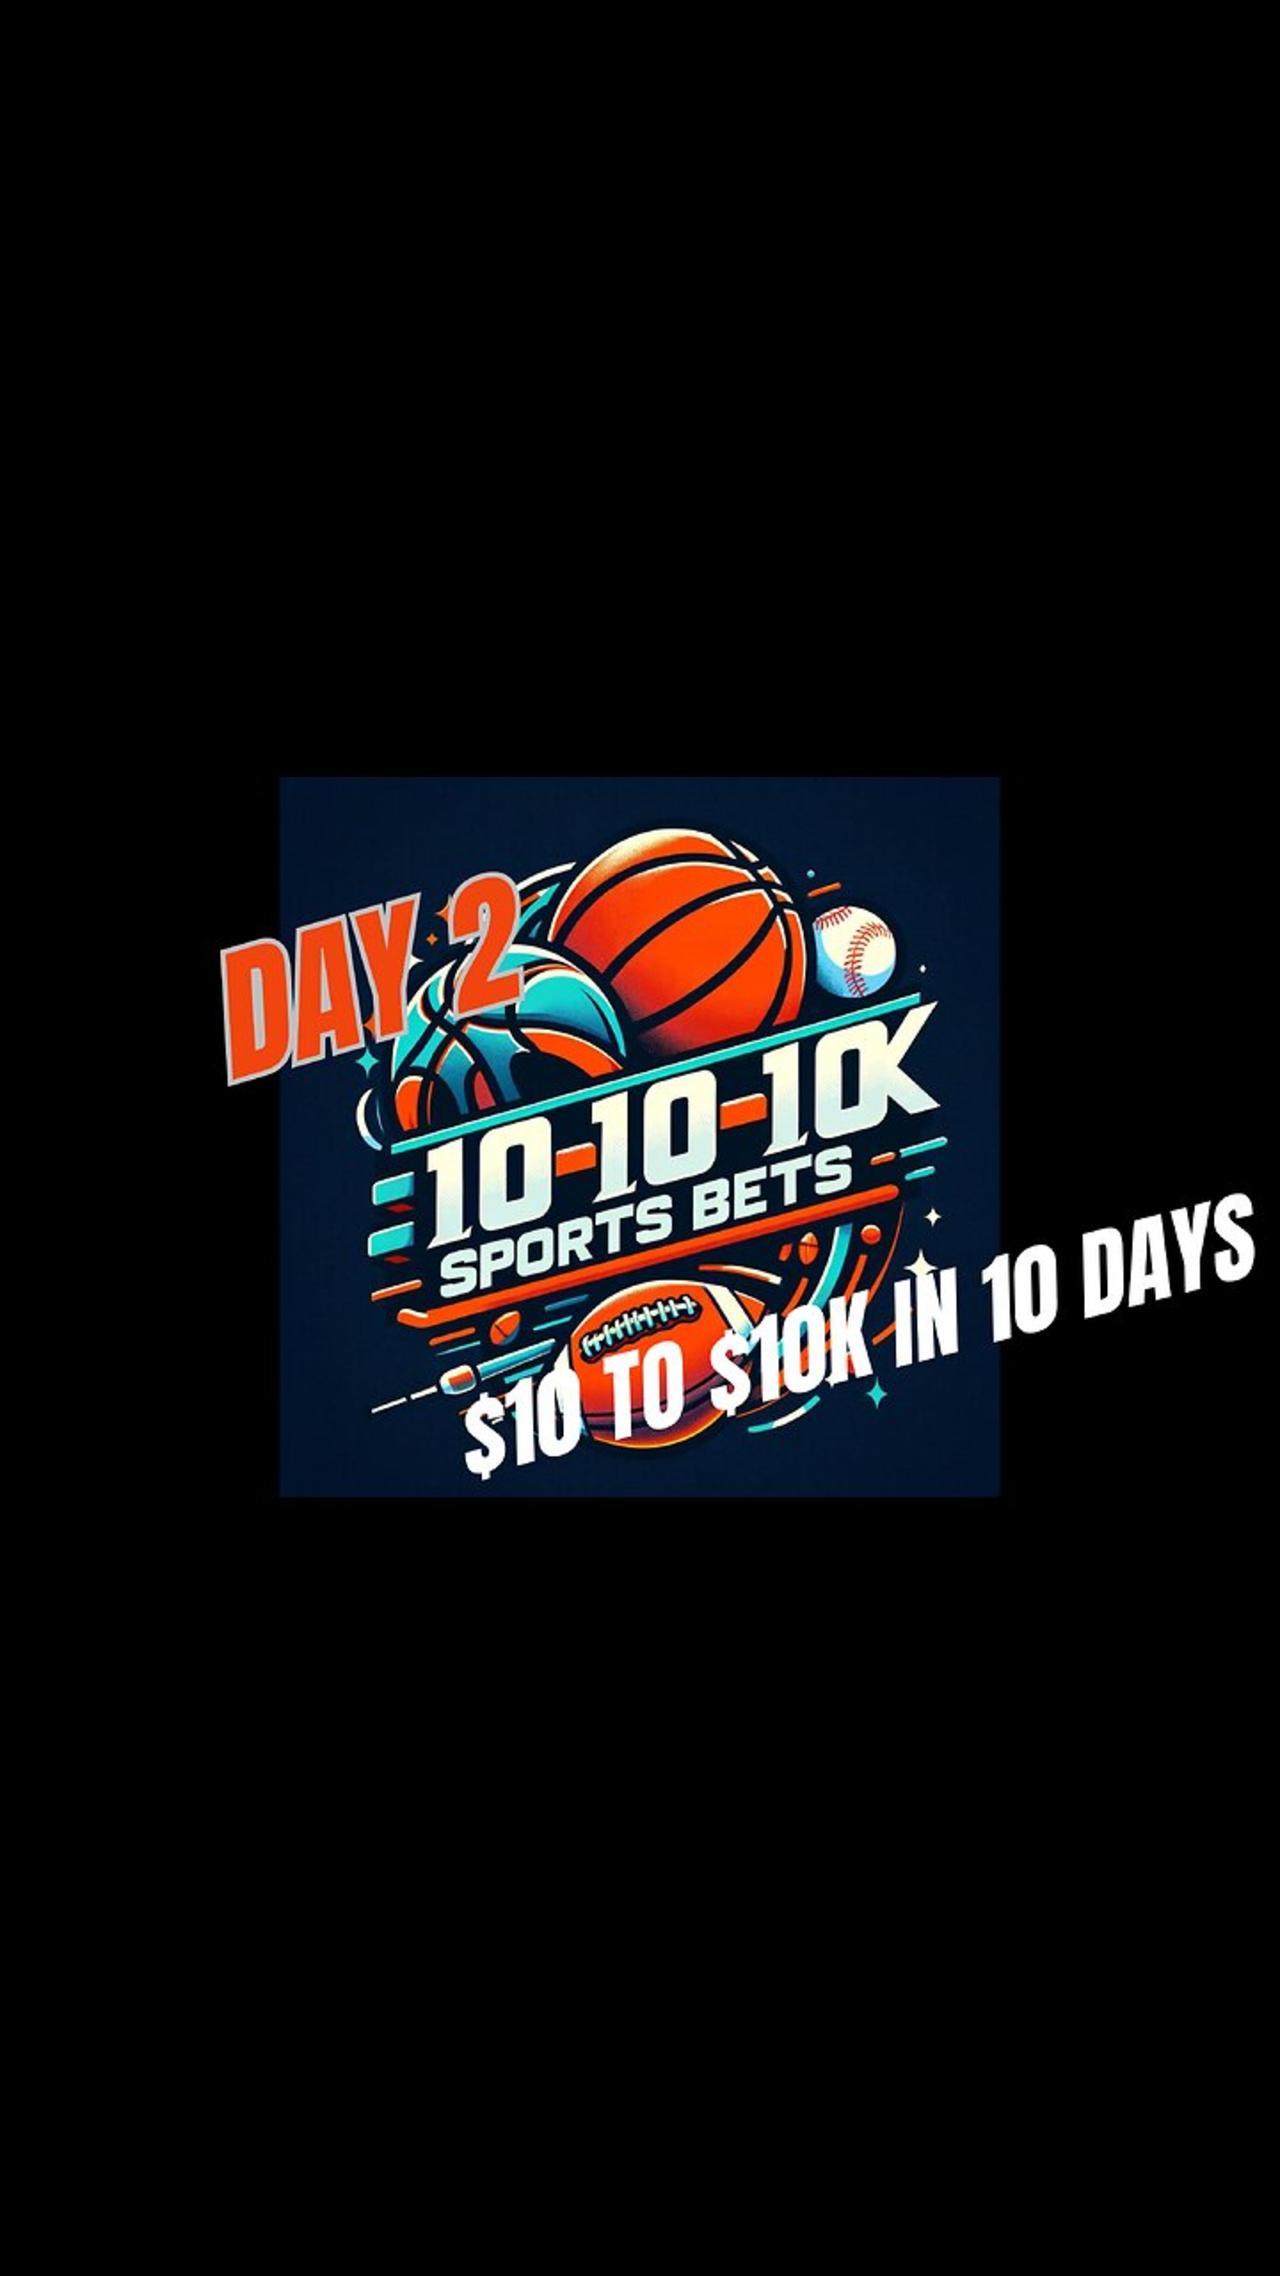 "Kickoff to $10K: Day 1 Success & Next Steps to Day 2 in Our Betting Challenge!"